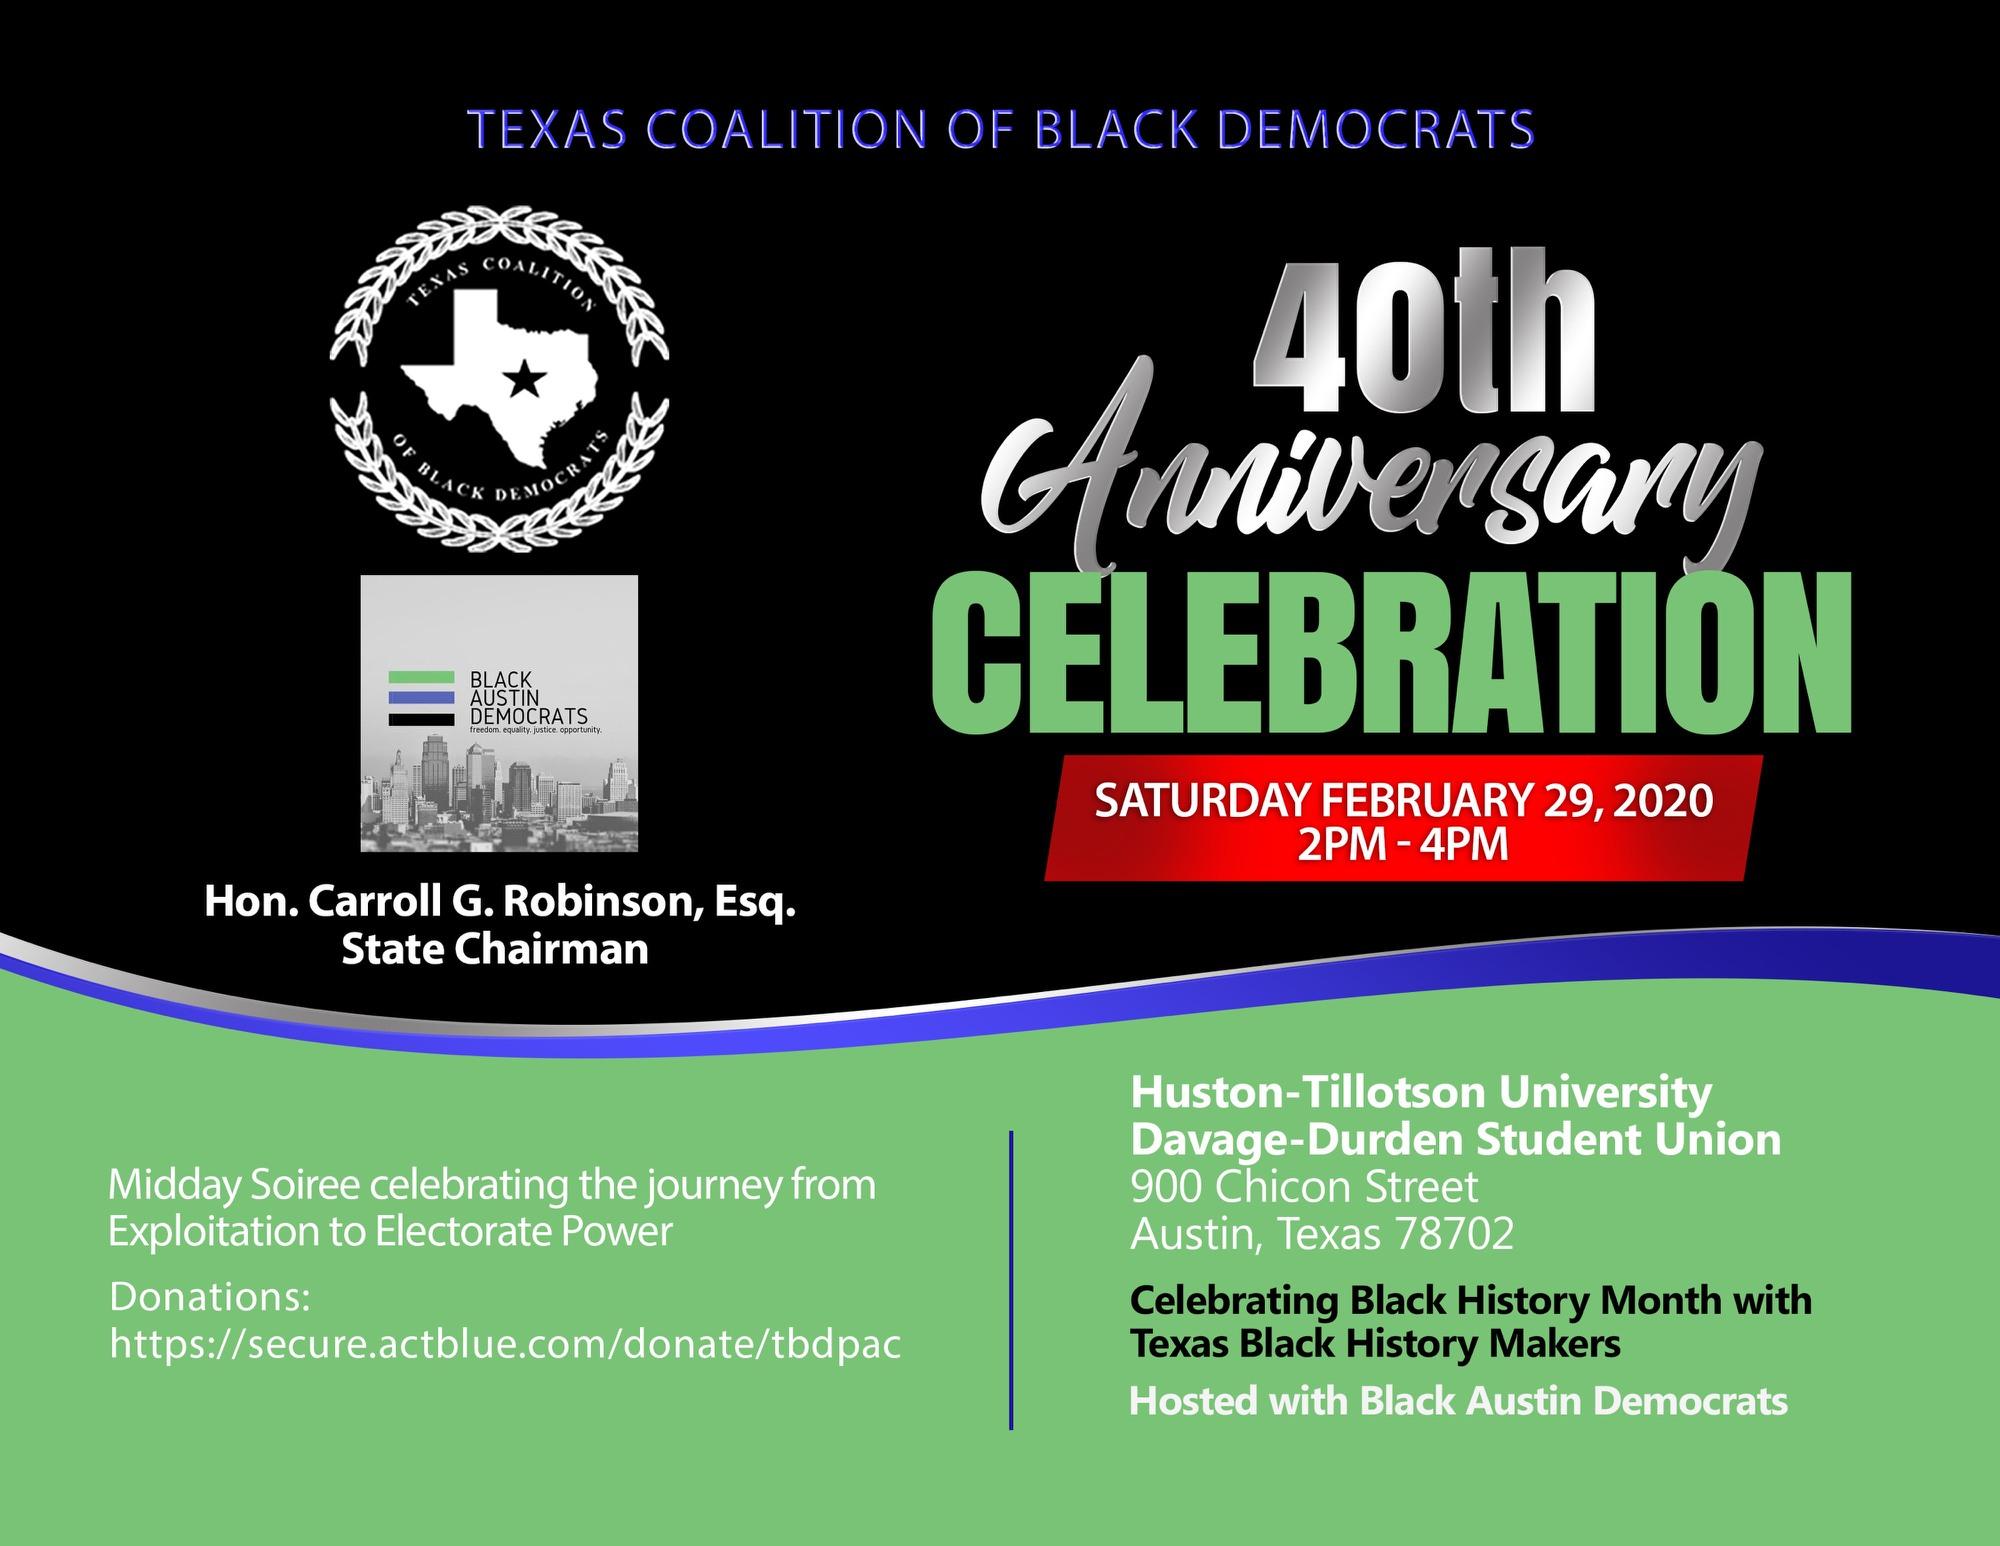 40TH ANNIVERSARY TEXAS COALITION OF BLACK DEMOCRATS - Midday Soirée celebrating the journey from Exploitation to Electorate Power